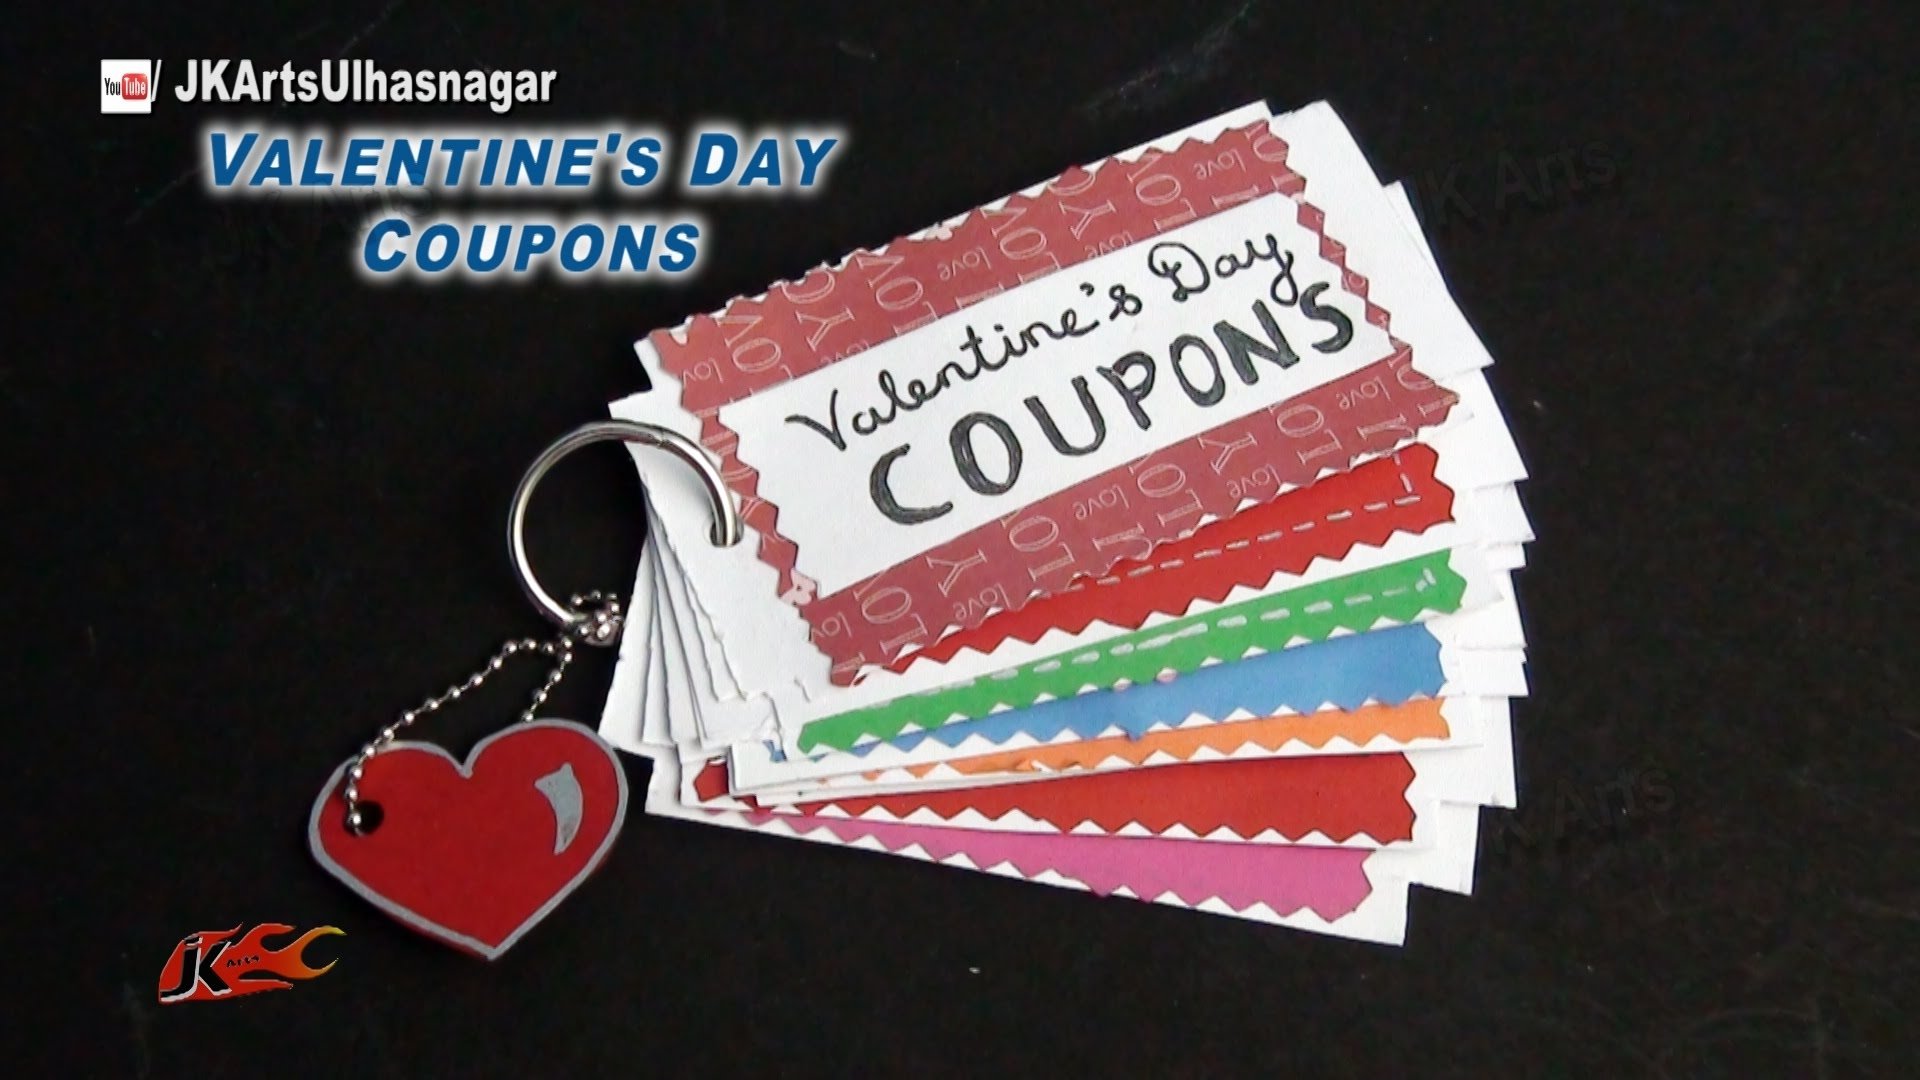 10 Elegant Homemade Coupon Book For Boyfriend Ideas diy love coupon book valentines day gift idea jk arts 857 youtube 2024